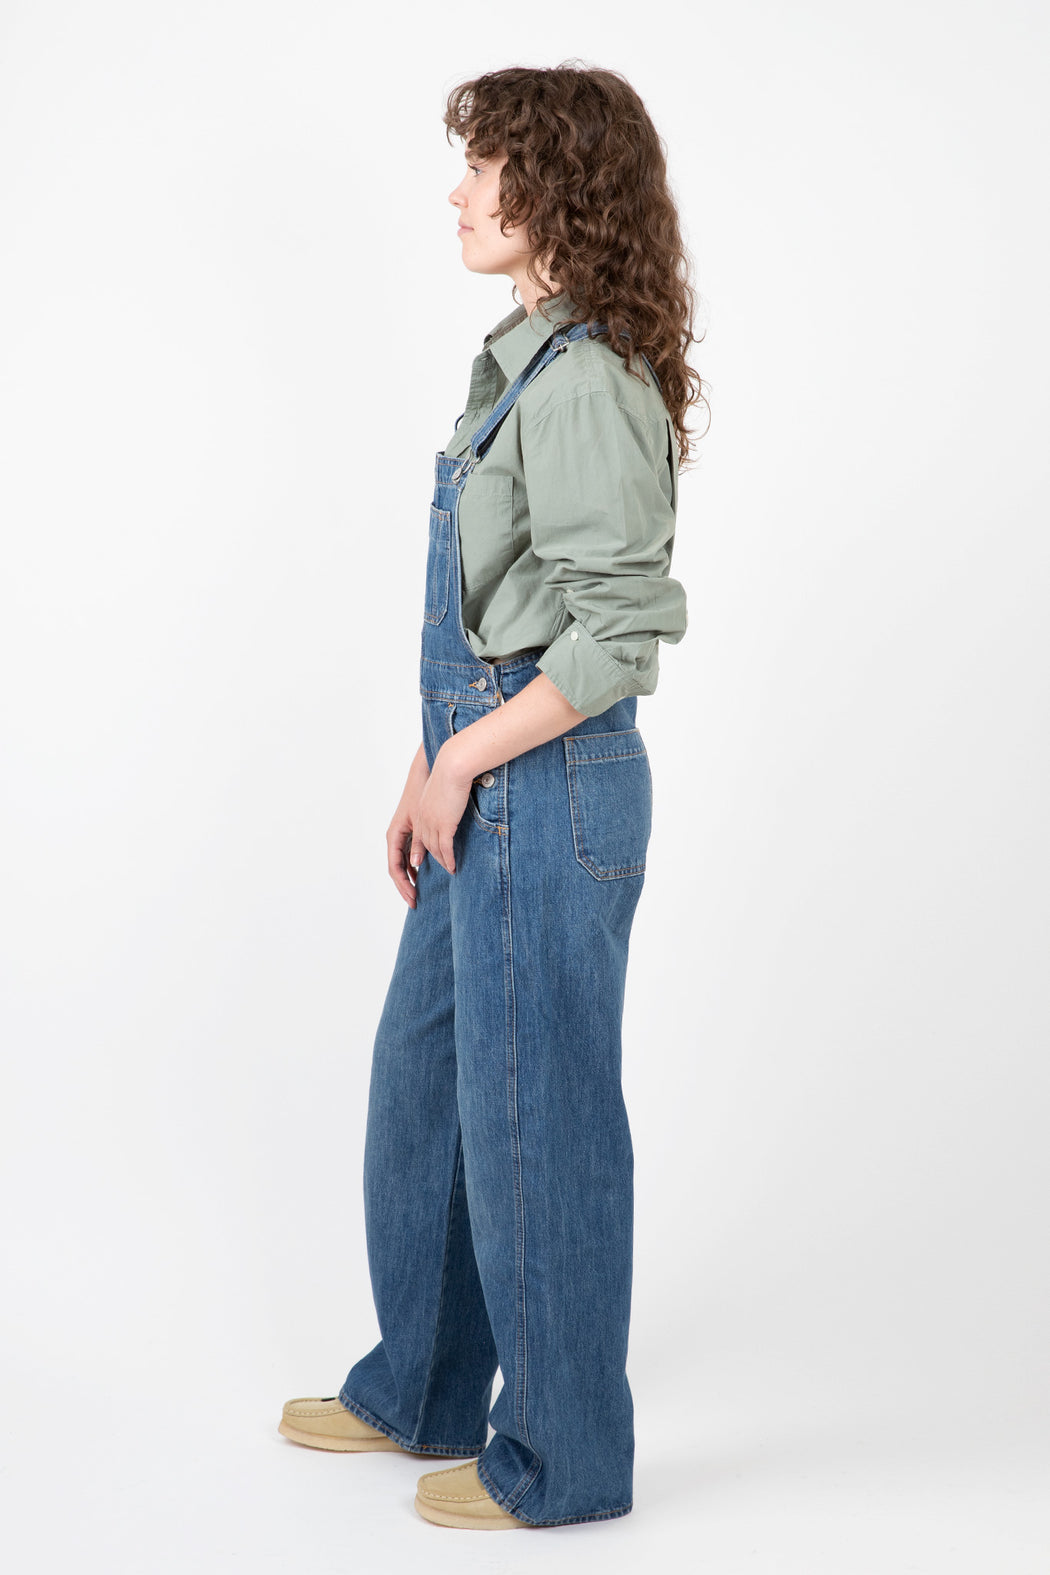 Levis-Utility-Loose-Overall-In-the-bag